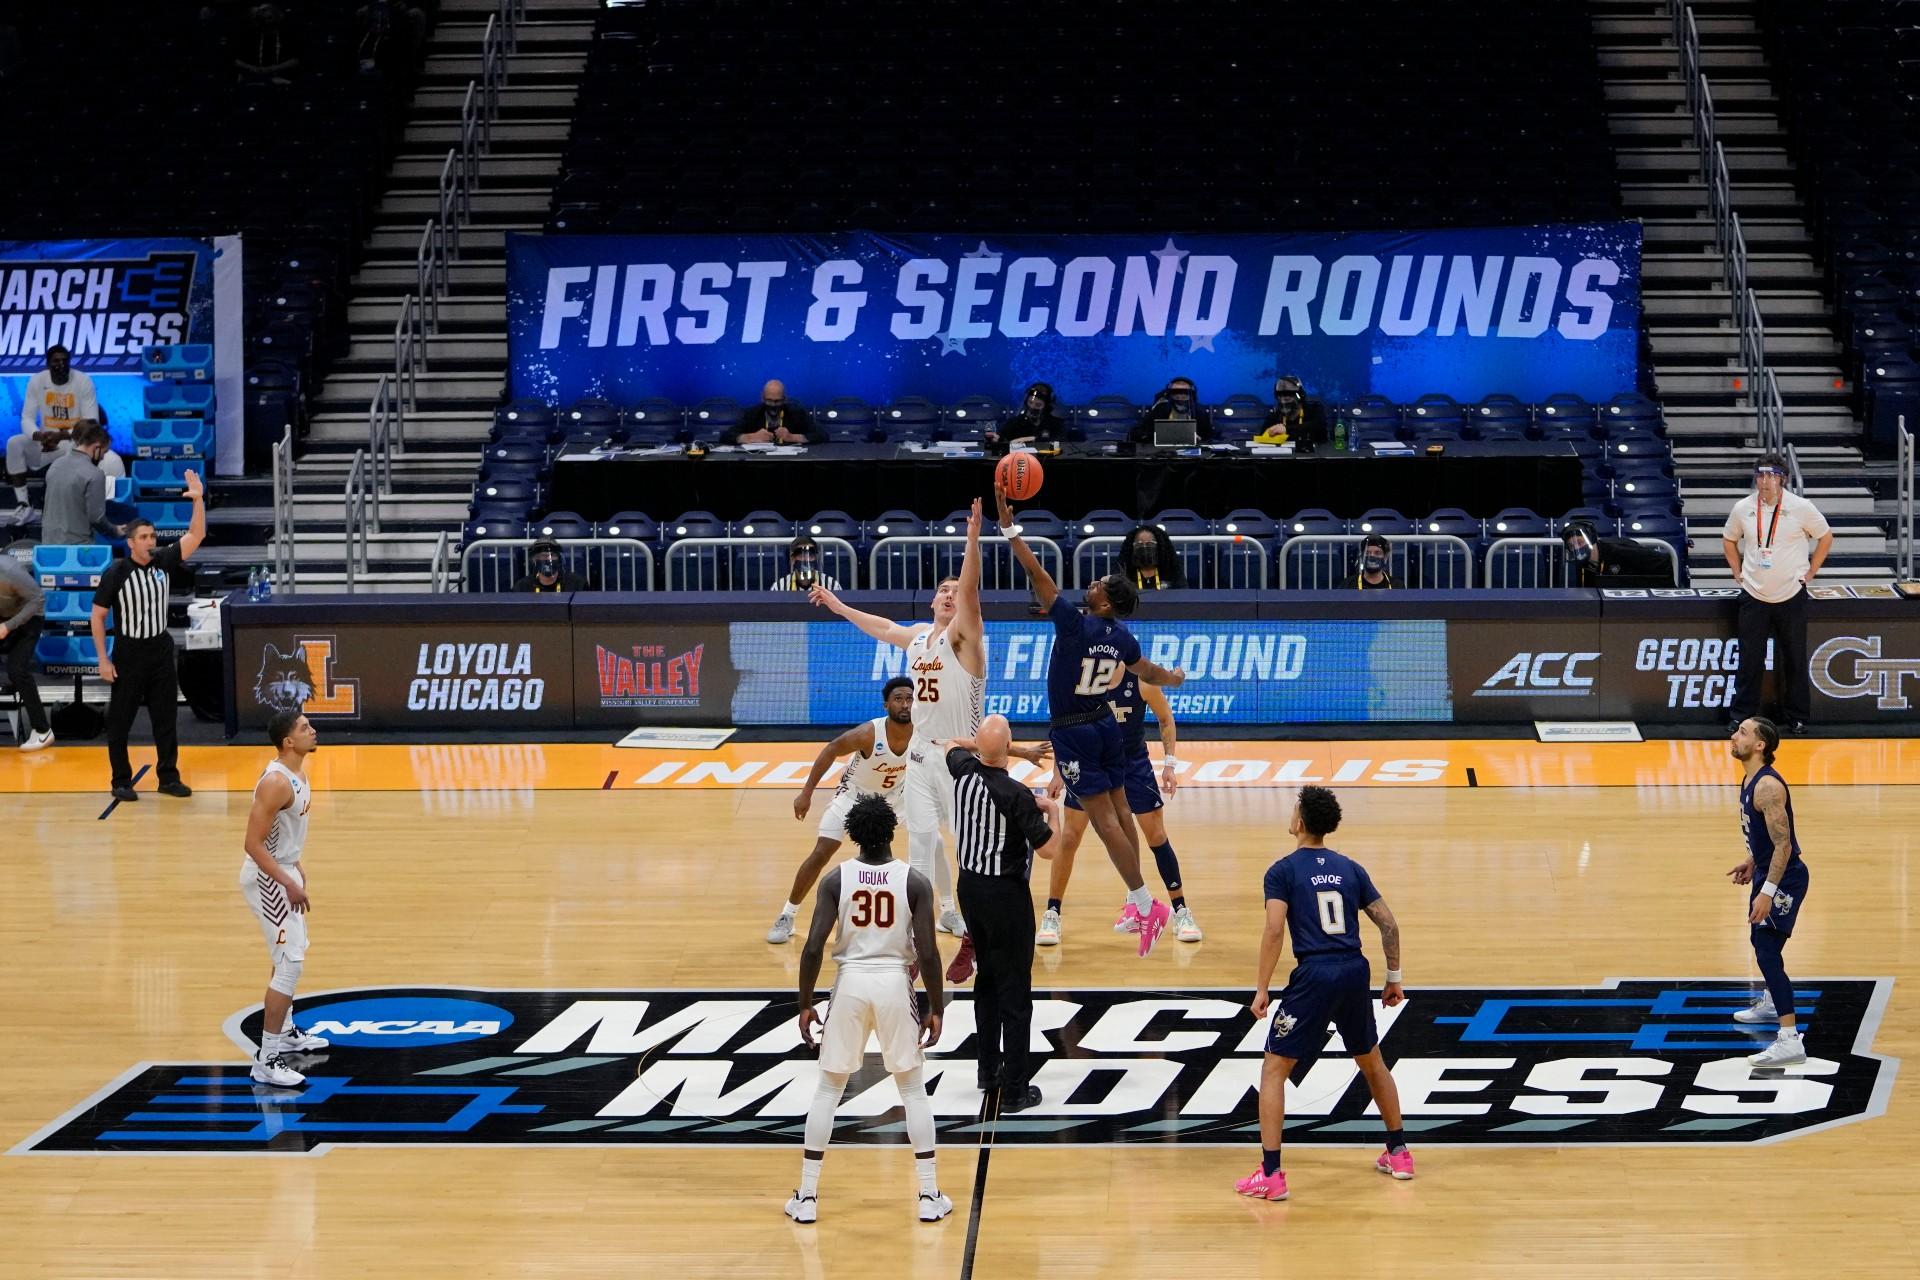 Georgia Tech tips off with Loyola Chicago at the start of a college basketball game in the first round of the NCAA tournament at Hinkle Fieldhouse, Indianapolis, Friday, March 19, 2021. (AP Photo / AJ Mast)